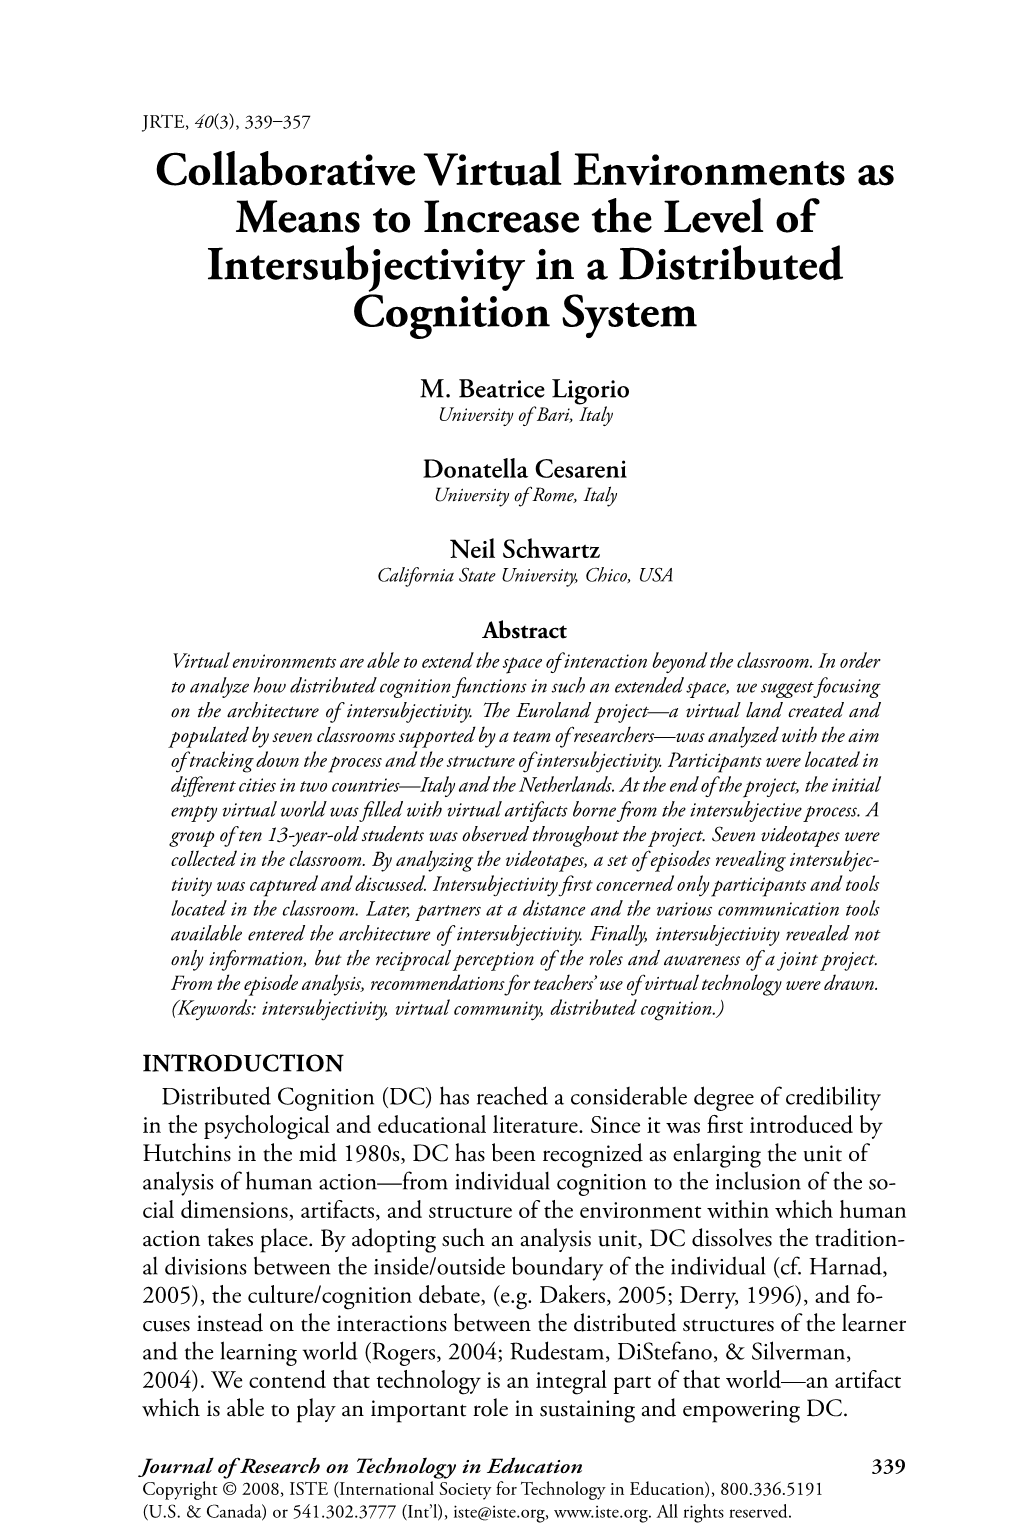 Collaborative Virtual Environments As Means to Increase the Level of Intersubjectivity in a Distributed Cognition System